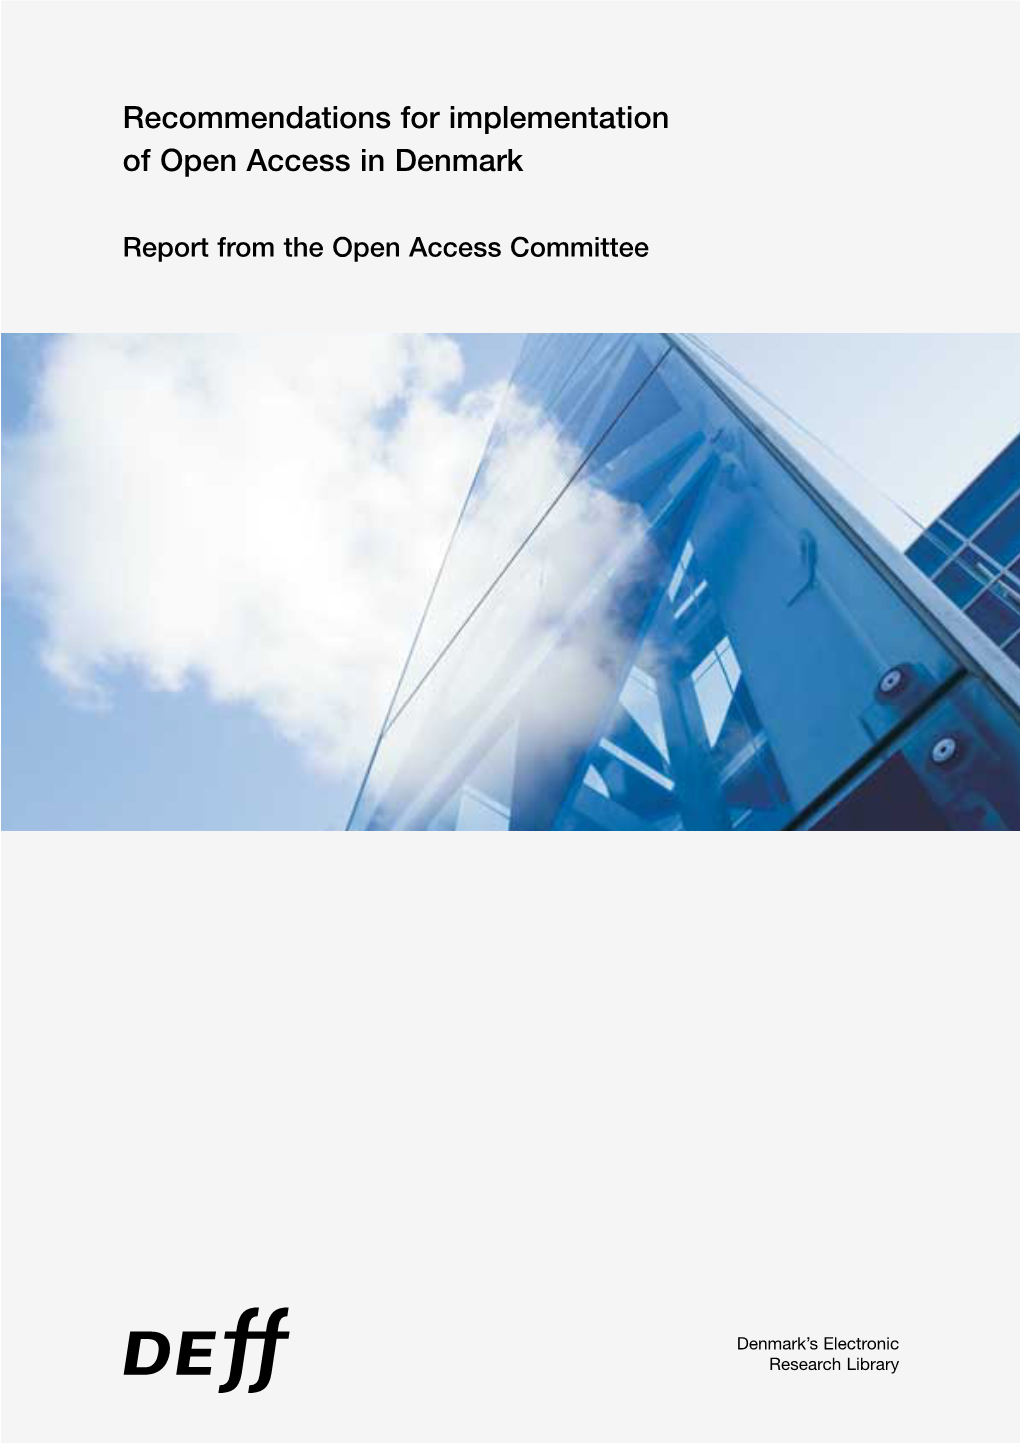 Recommendations for Implementation of Open Access in Denmark